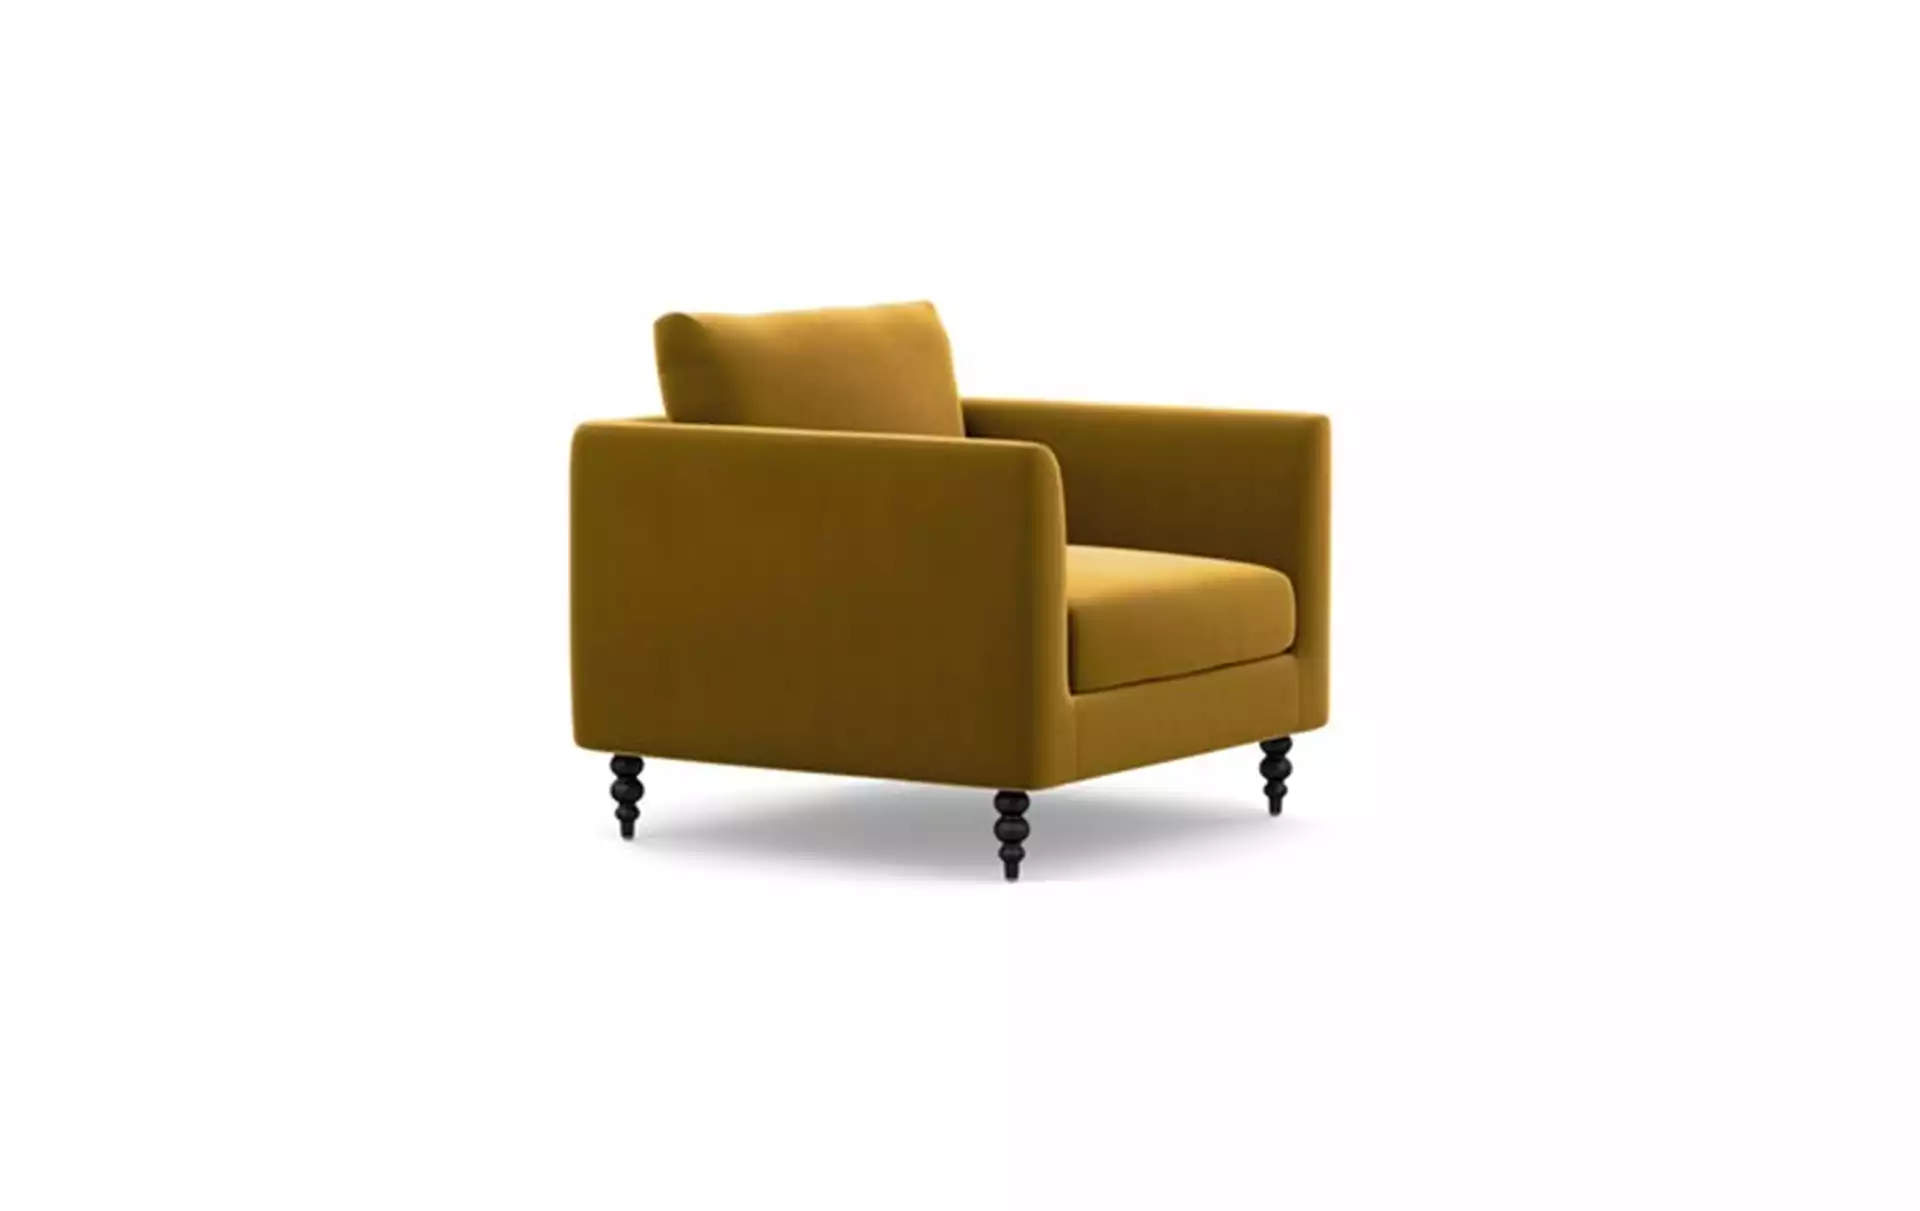 Owens Accent Chair with Yellow Citrine Fabric and Matte Black legs